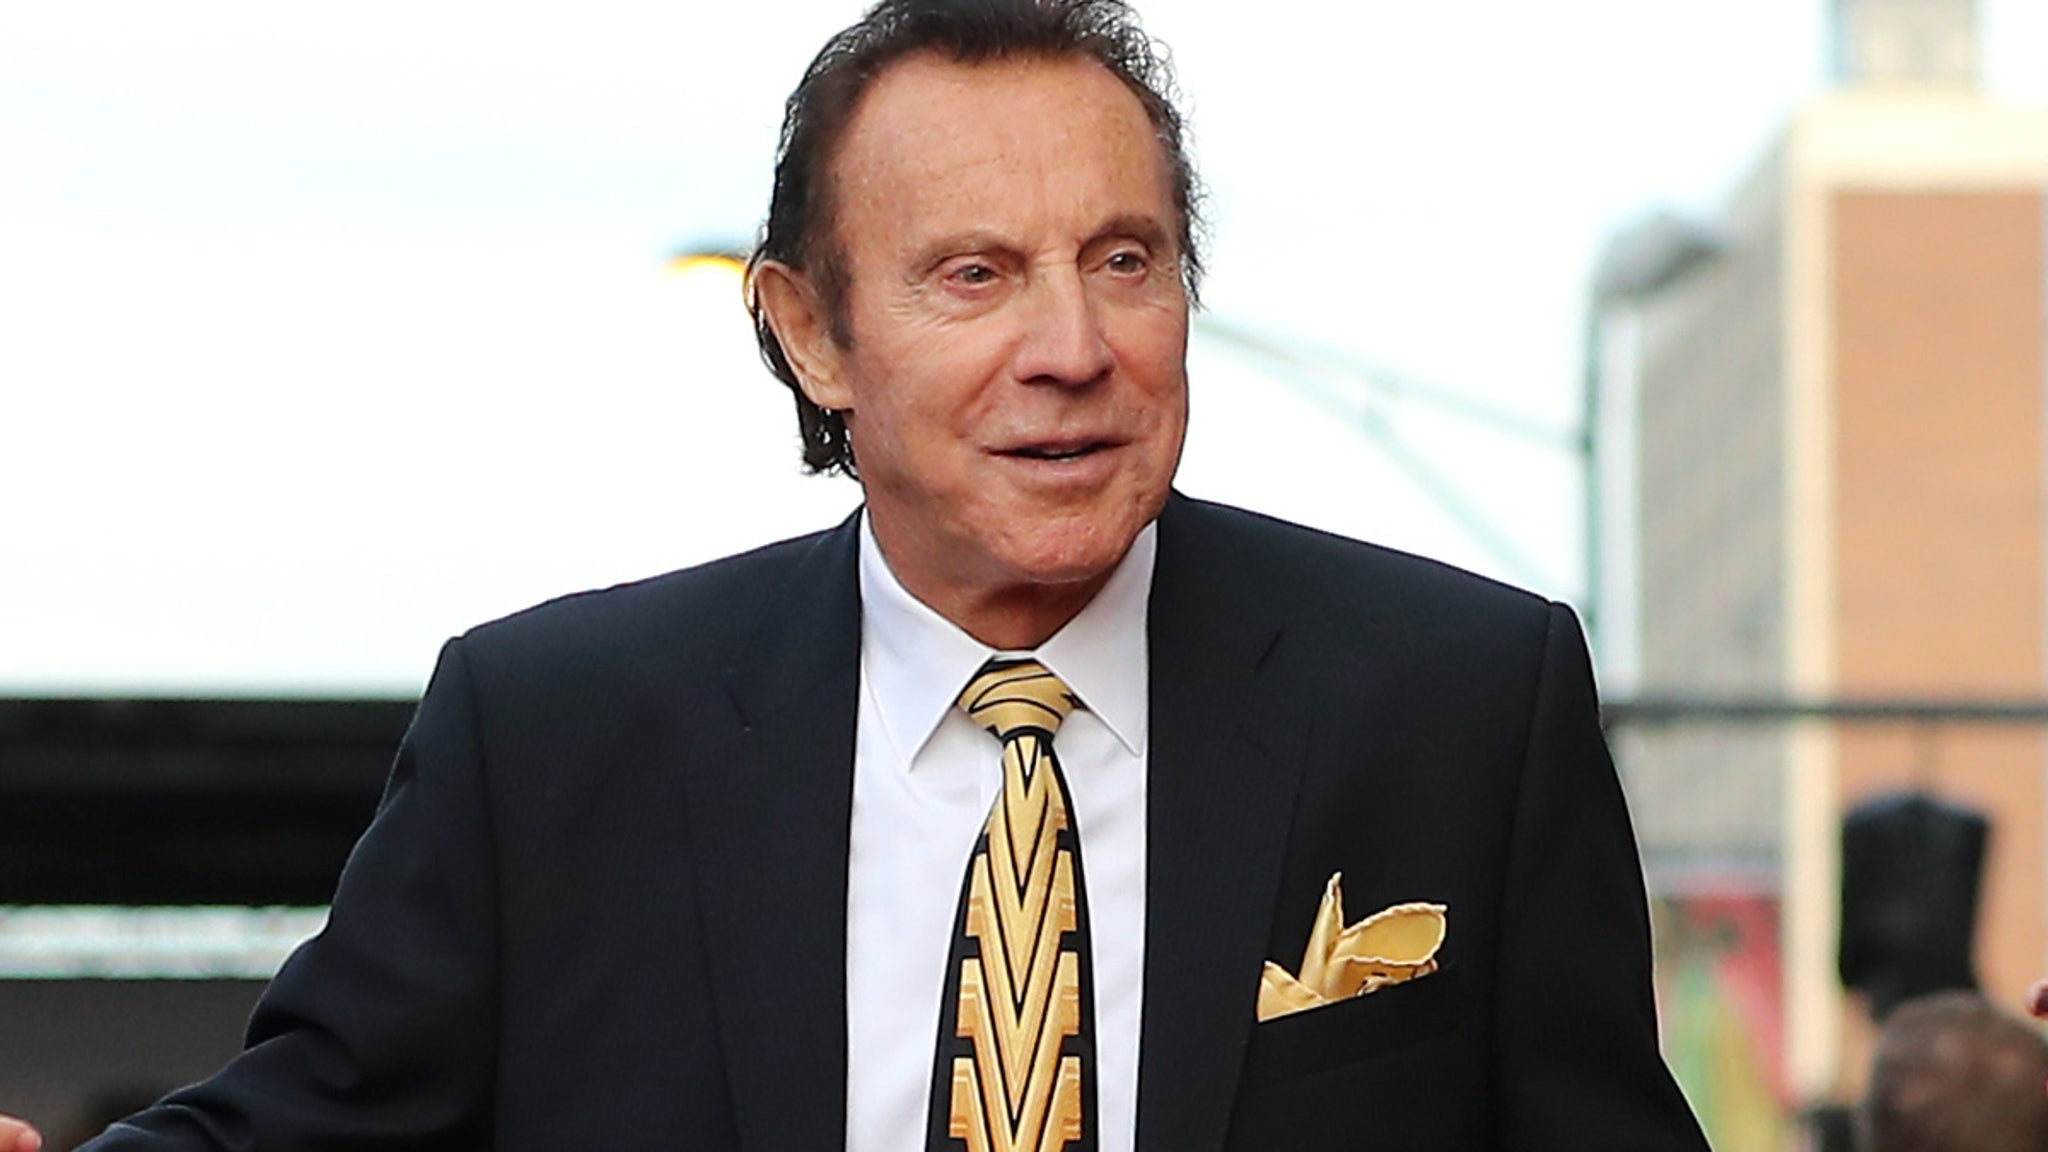 Blackhawks Hall of Fame goaltender Tony Esposito dies at 78 following  battle with pancreatic cancer